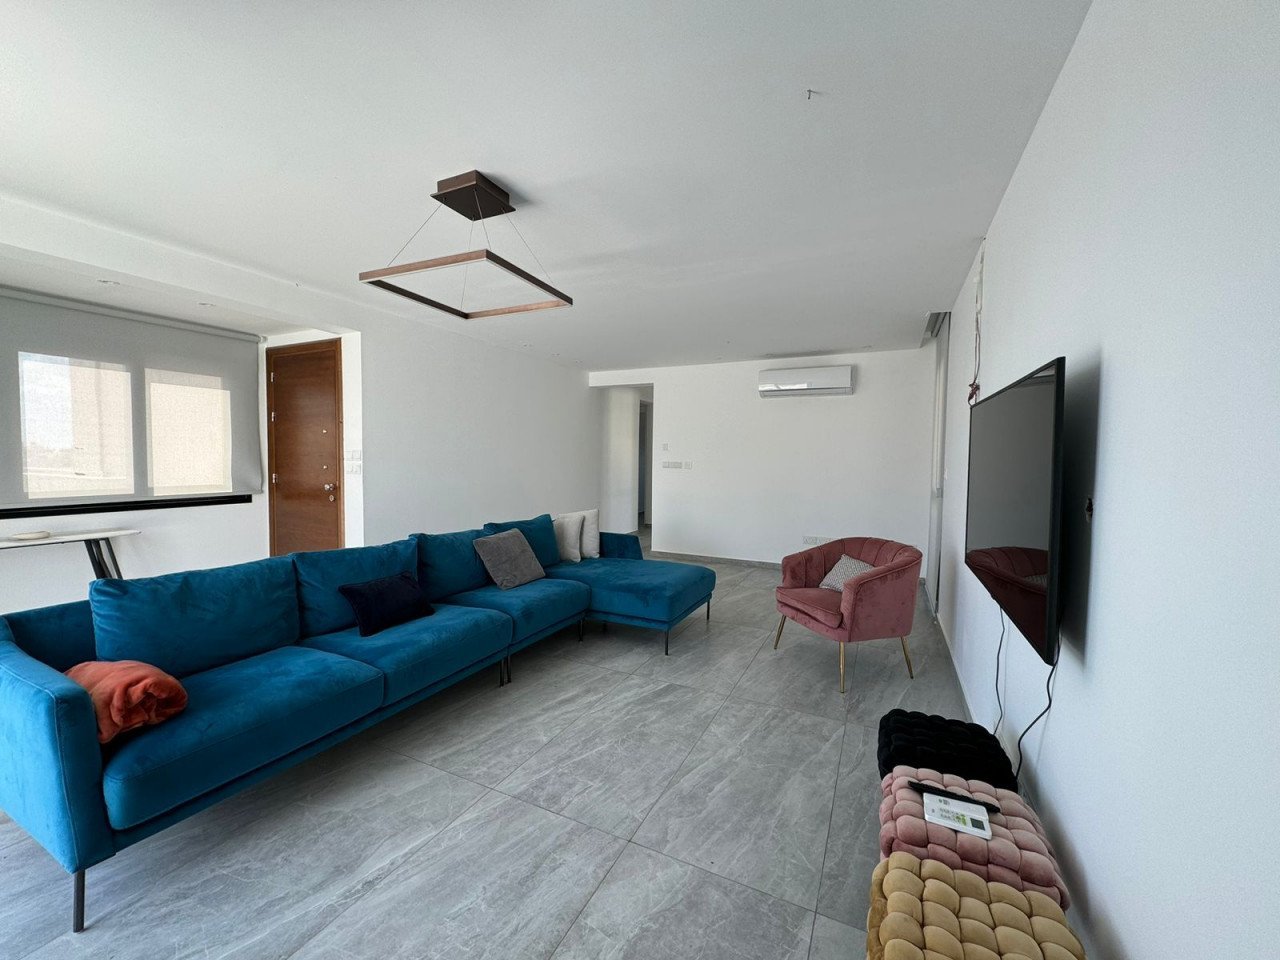 Property for Rent: Apartment (Flat) in Agia Zoni, Limassol for Rent | Key Realtor Cyprus